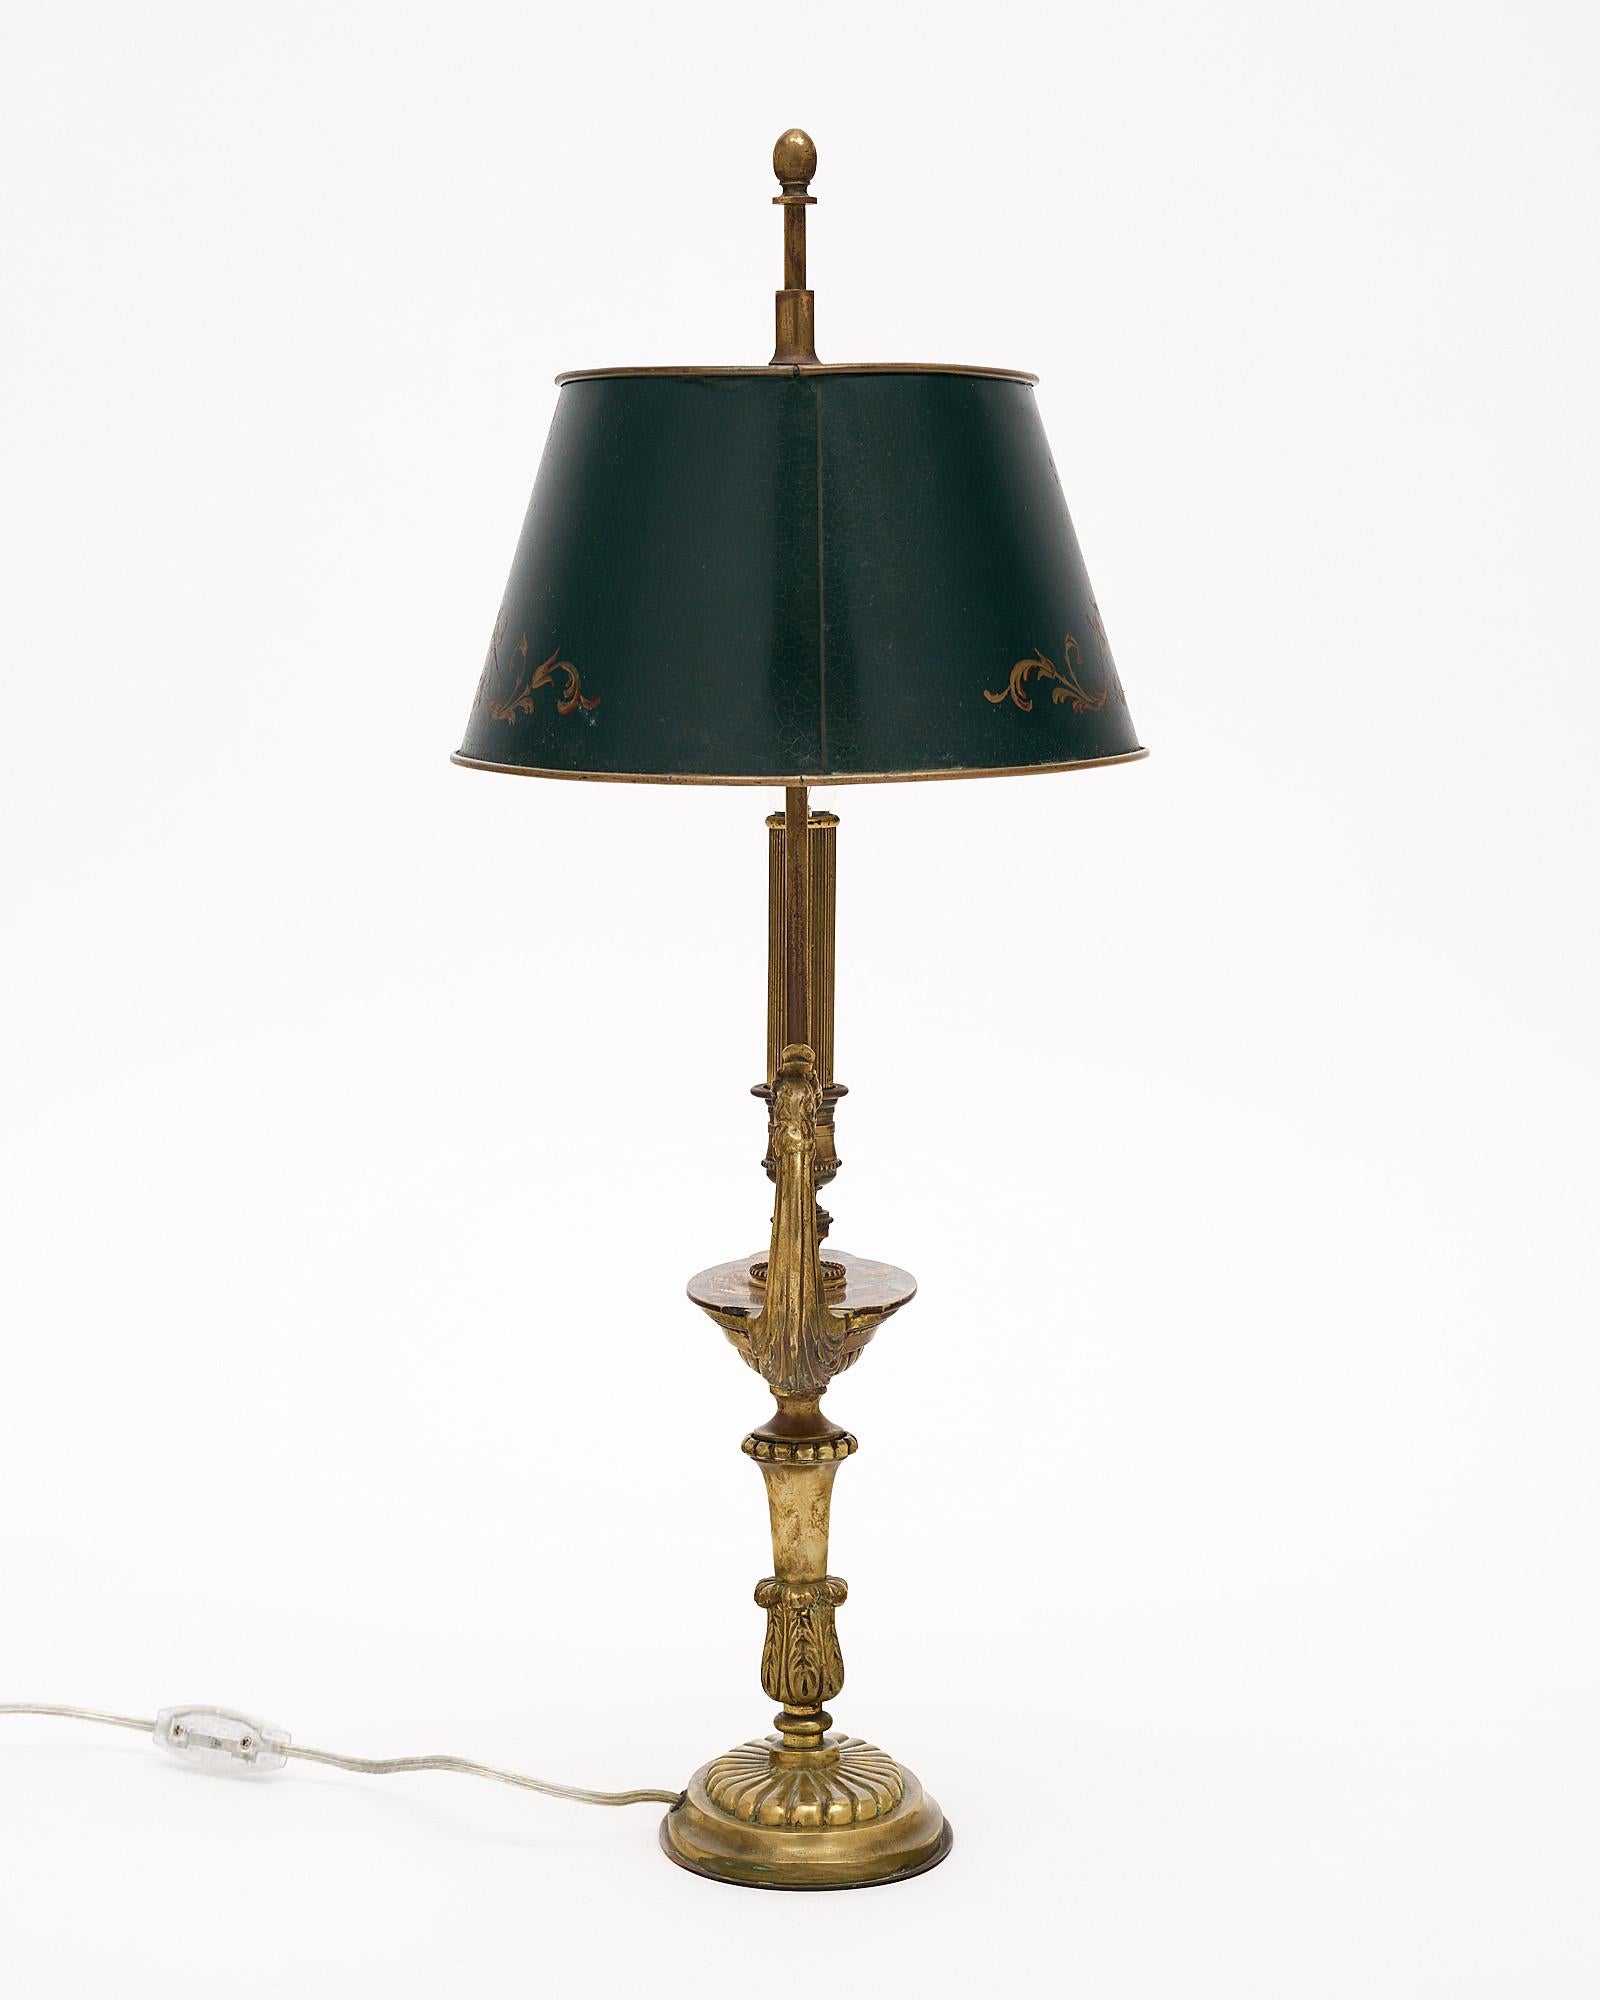 Lamp, French, “Bouillote”, made of finely cast bronze. The piece mimics a traditional oil lamp and is topped with a gold leaf painted adjustable lamp shade. It has been newly wired to fit US standards. The measurements listed include the shade.